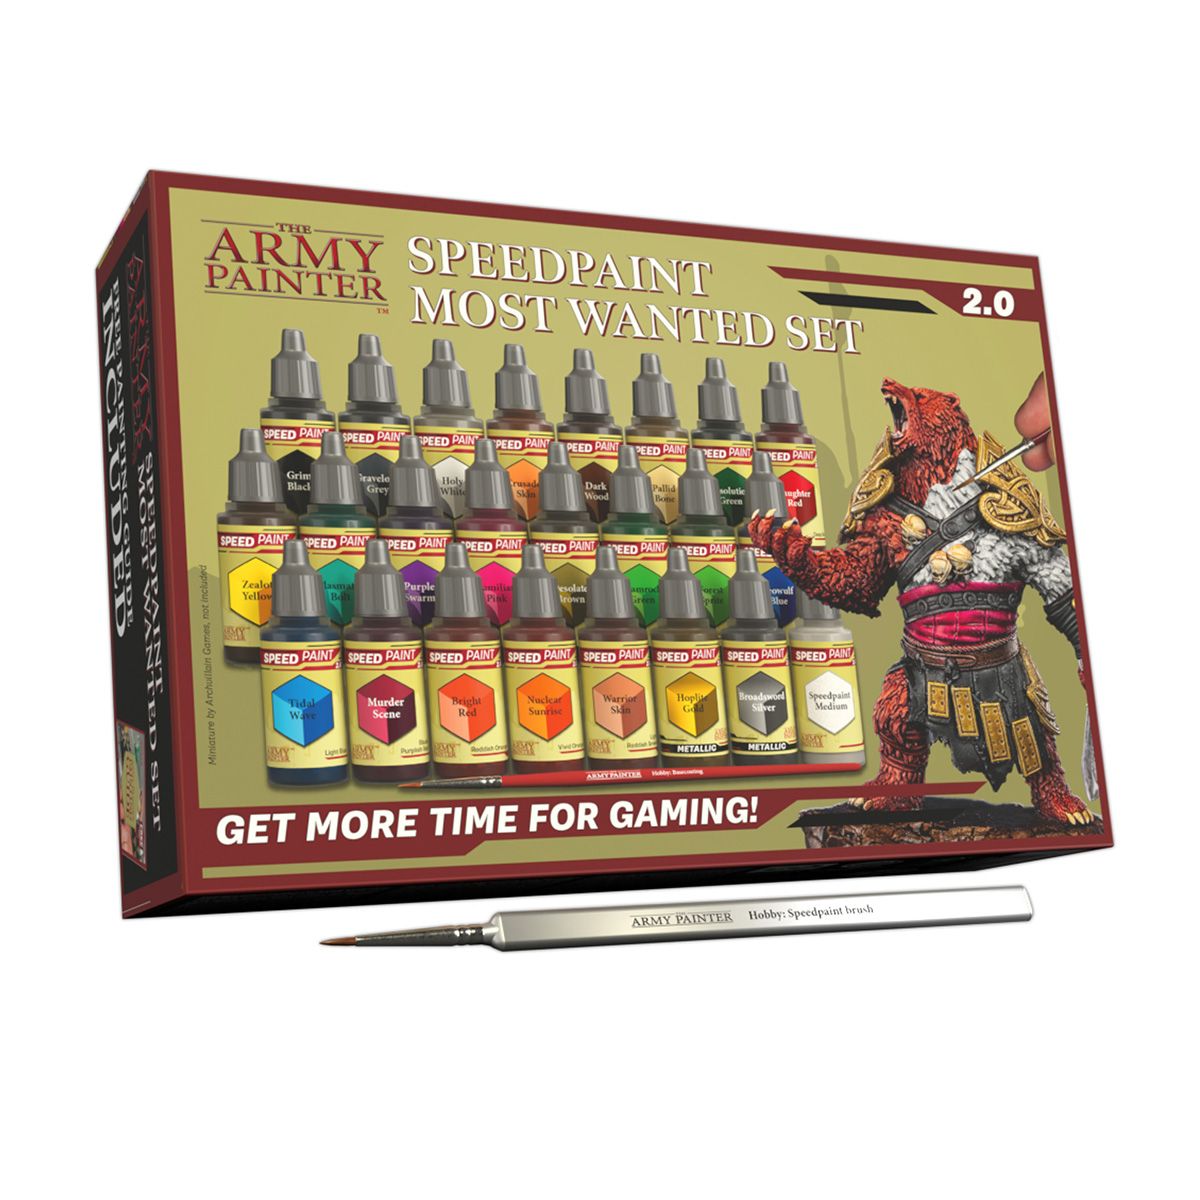 The Army Painter -  Speedpaint Most Wanted Set 2.0+